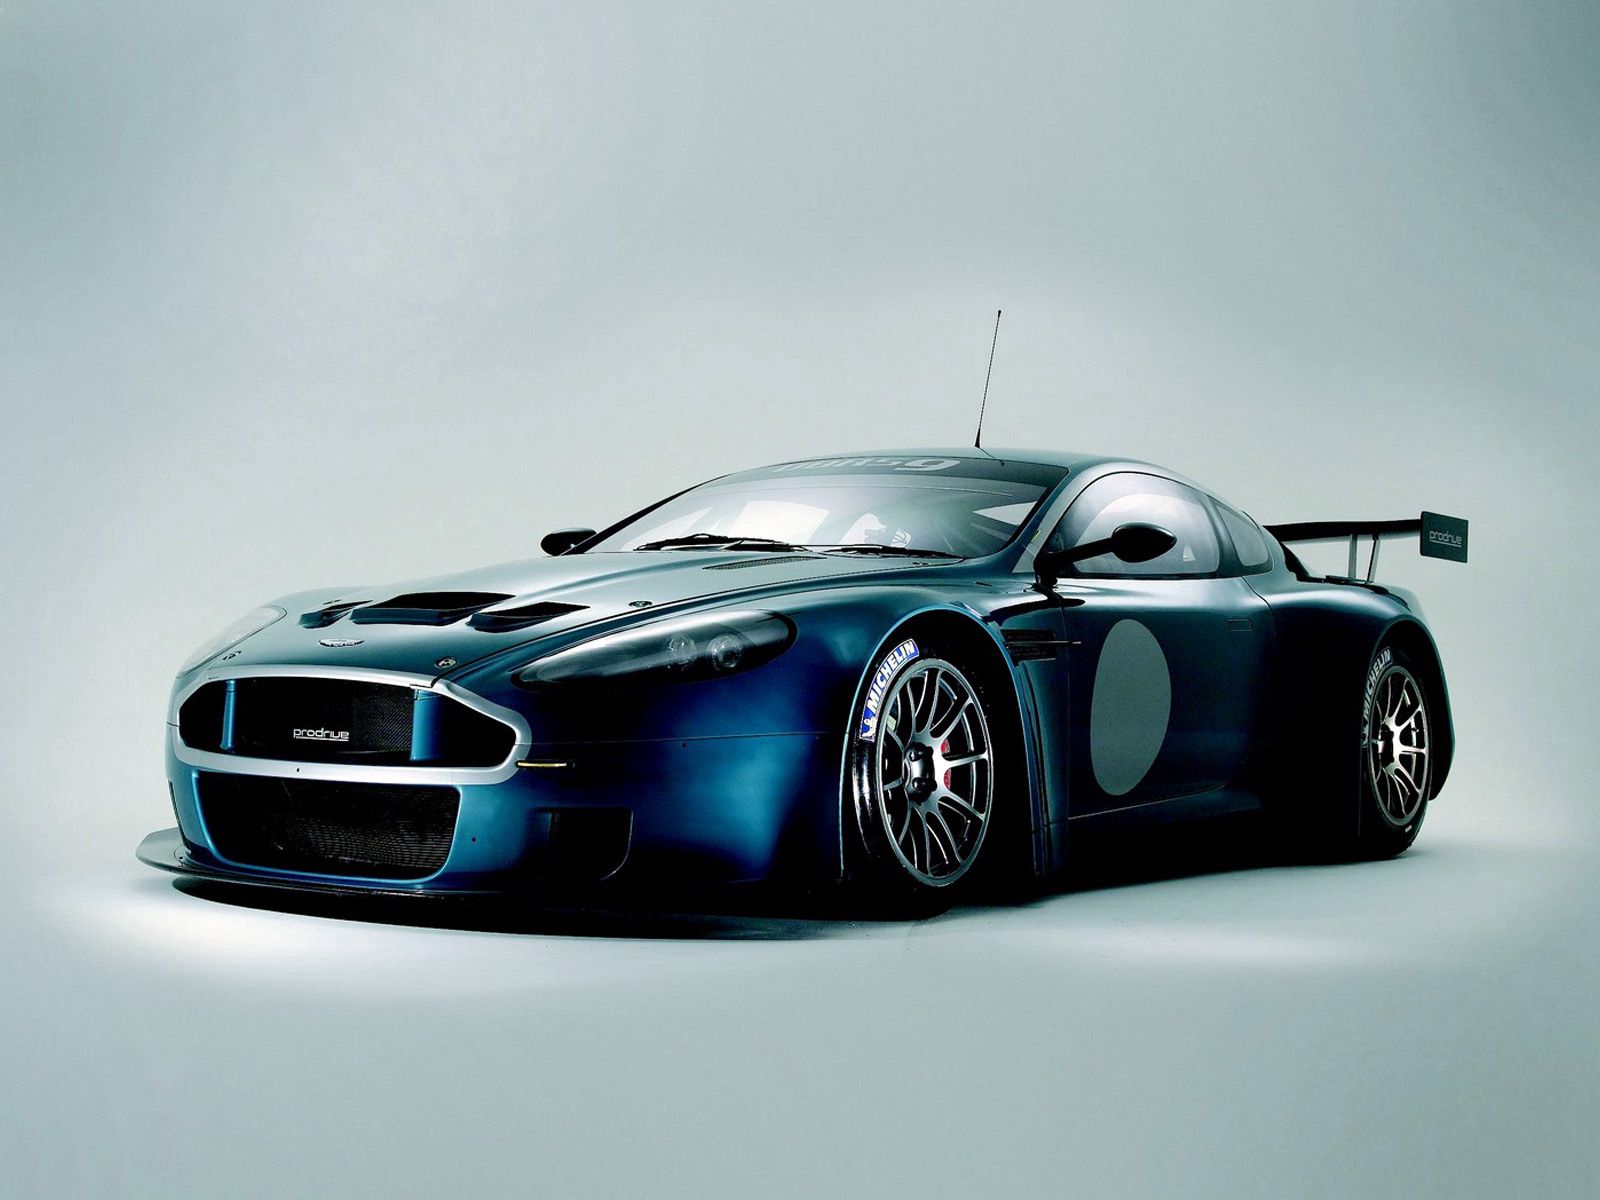 front view, sports, auto, aston martin, cars, blue, style, 2005, dbrs9 High Definition image